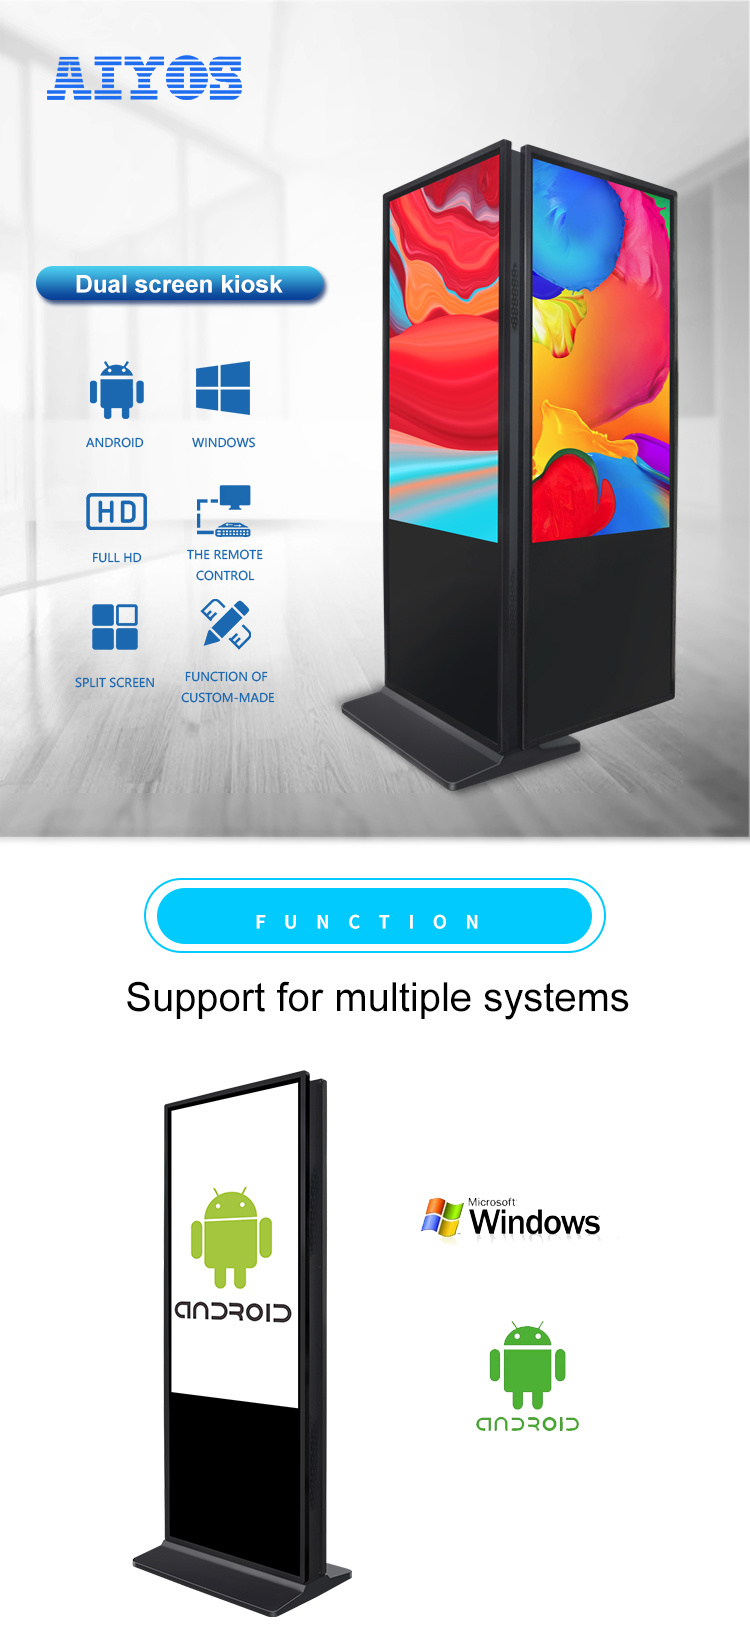 55 Inch Rk3399 Double Sided Advertising Display Dual Screen Advertising Kiosk